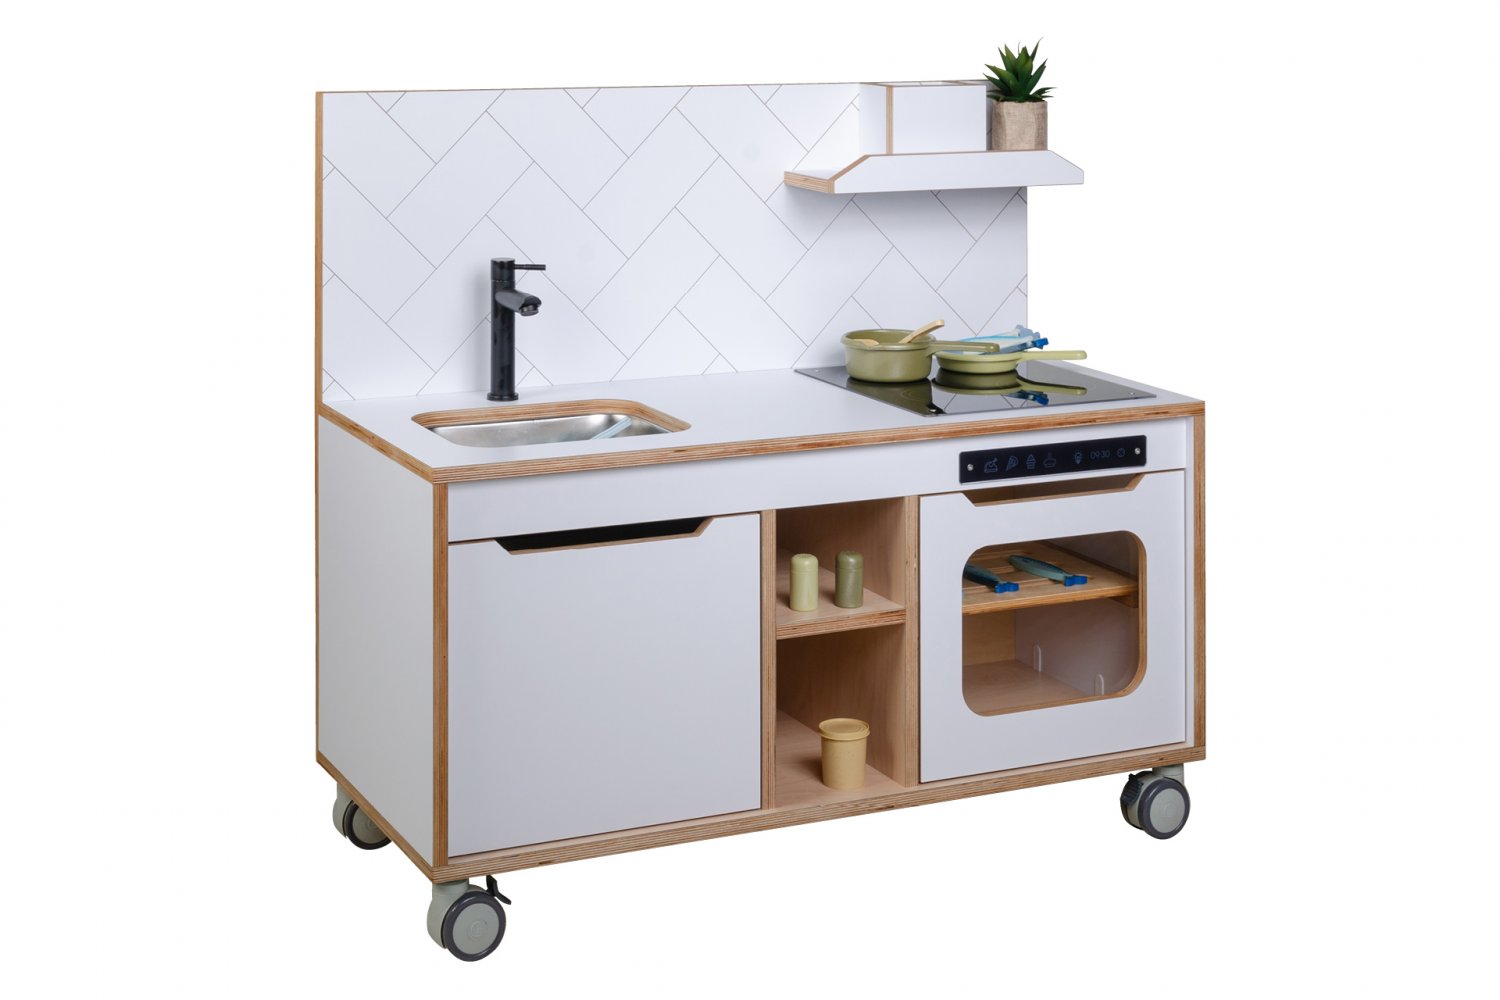 Wooden Plywood Kitchen for early learning centers